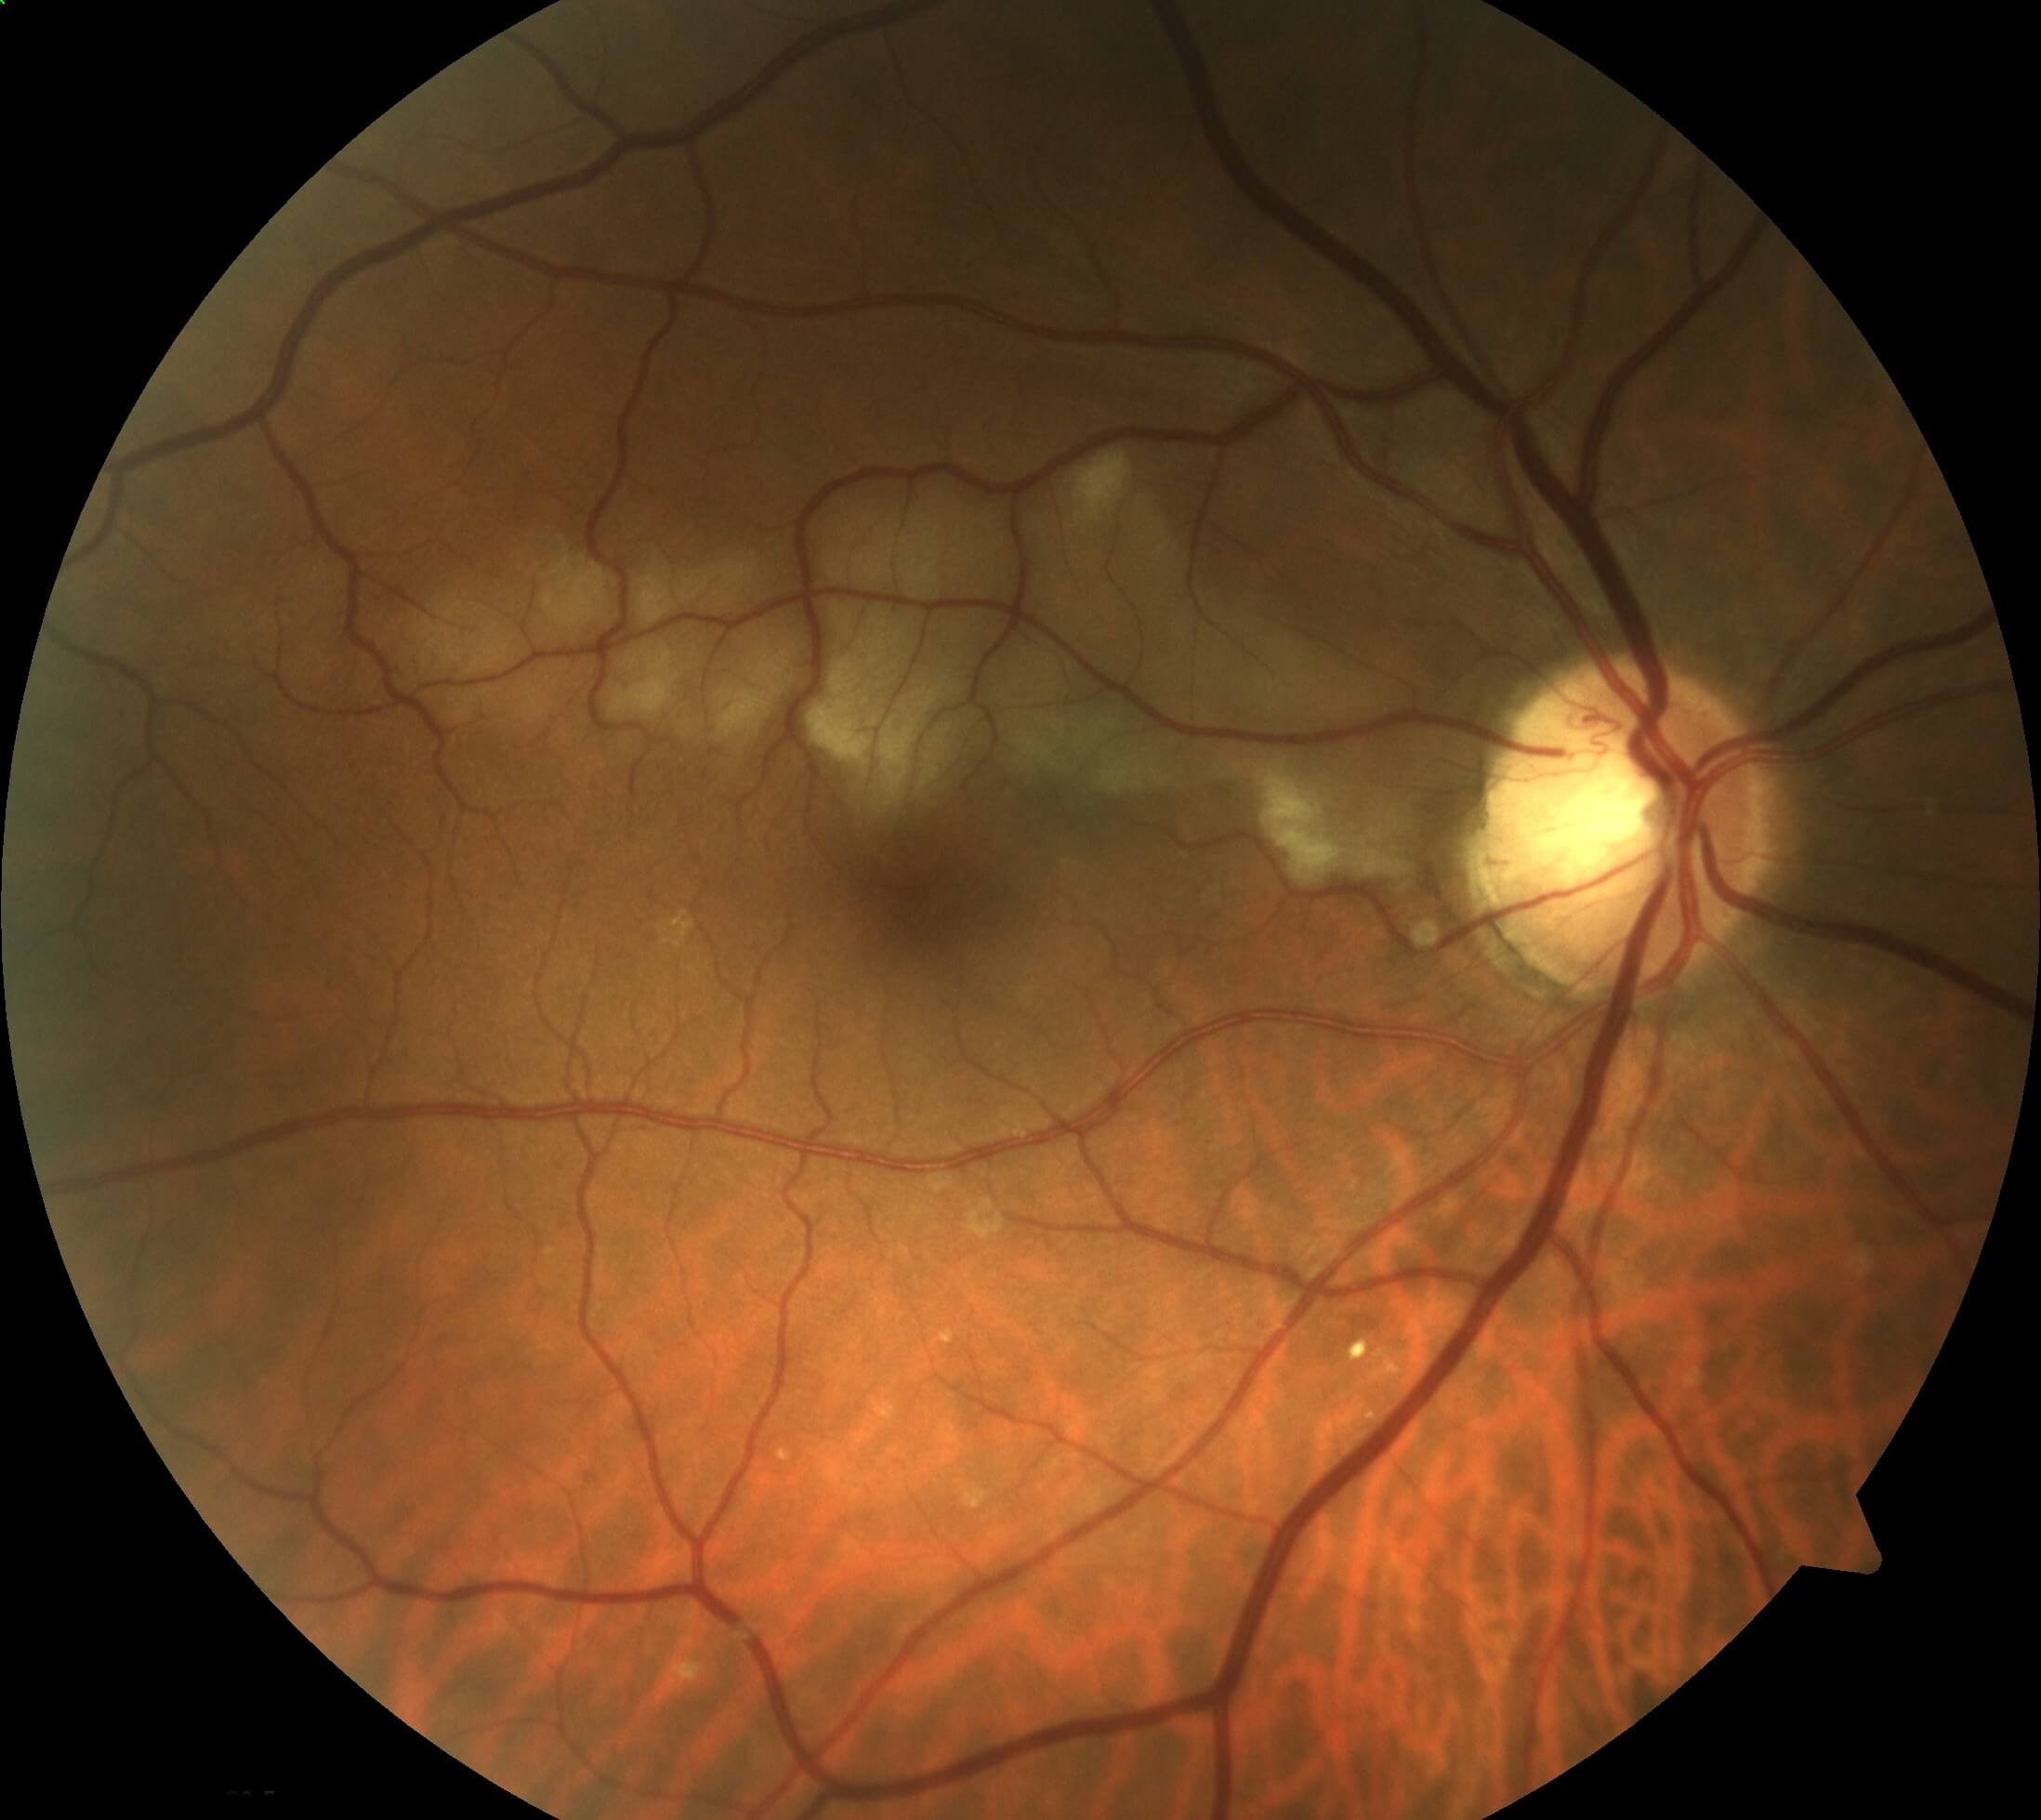 Two weeks after the initial occlusion there is confluence and contraction of the area of retinal pallor.